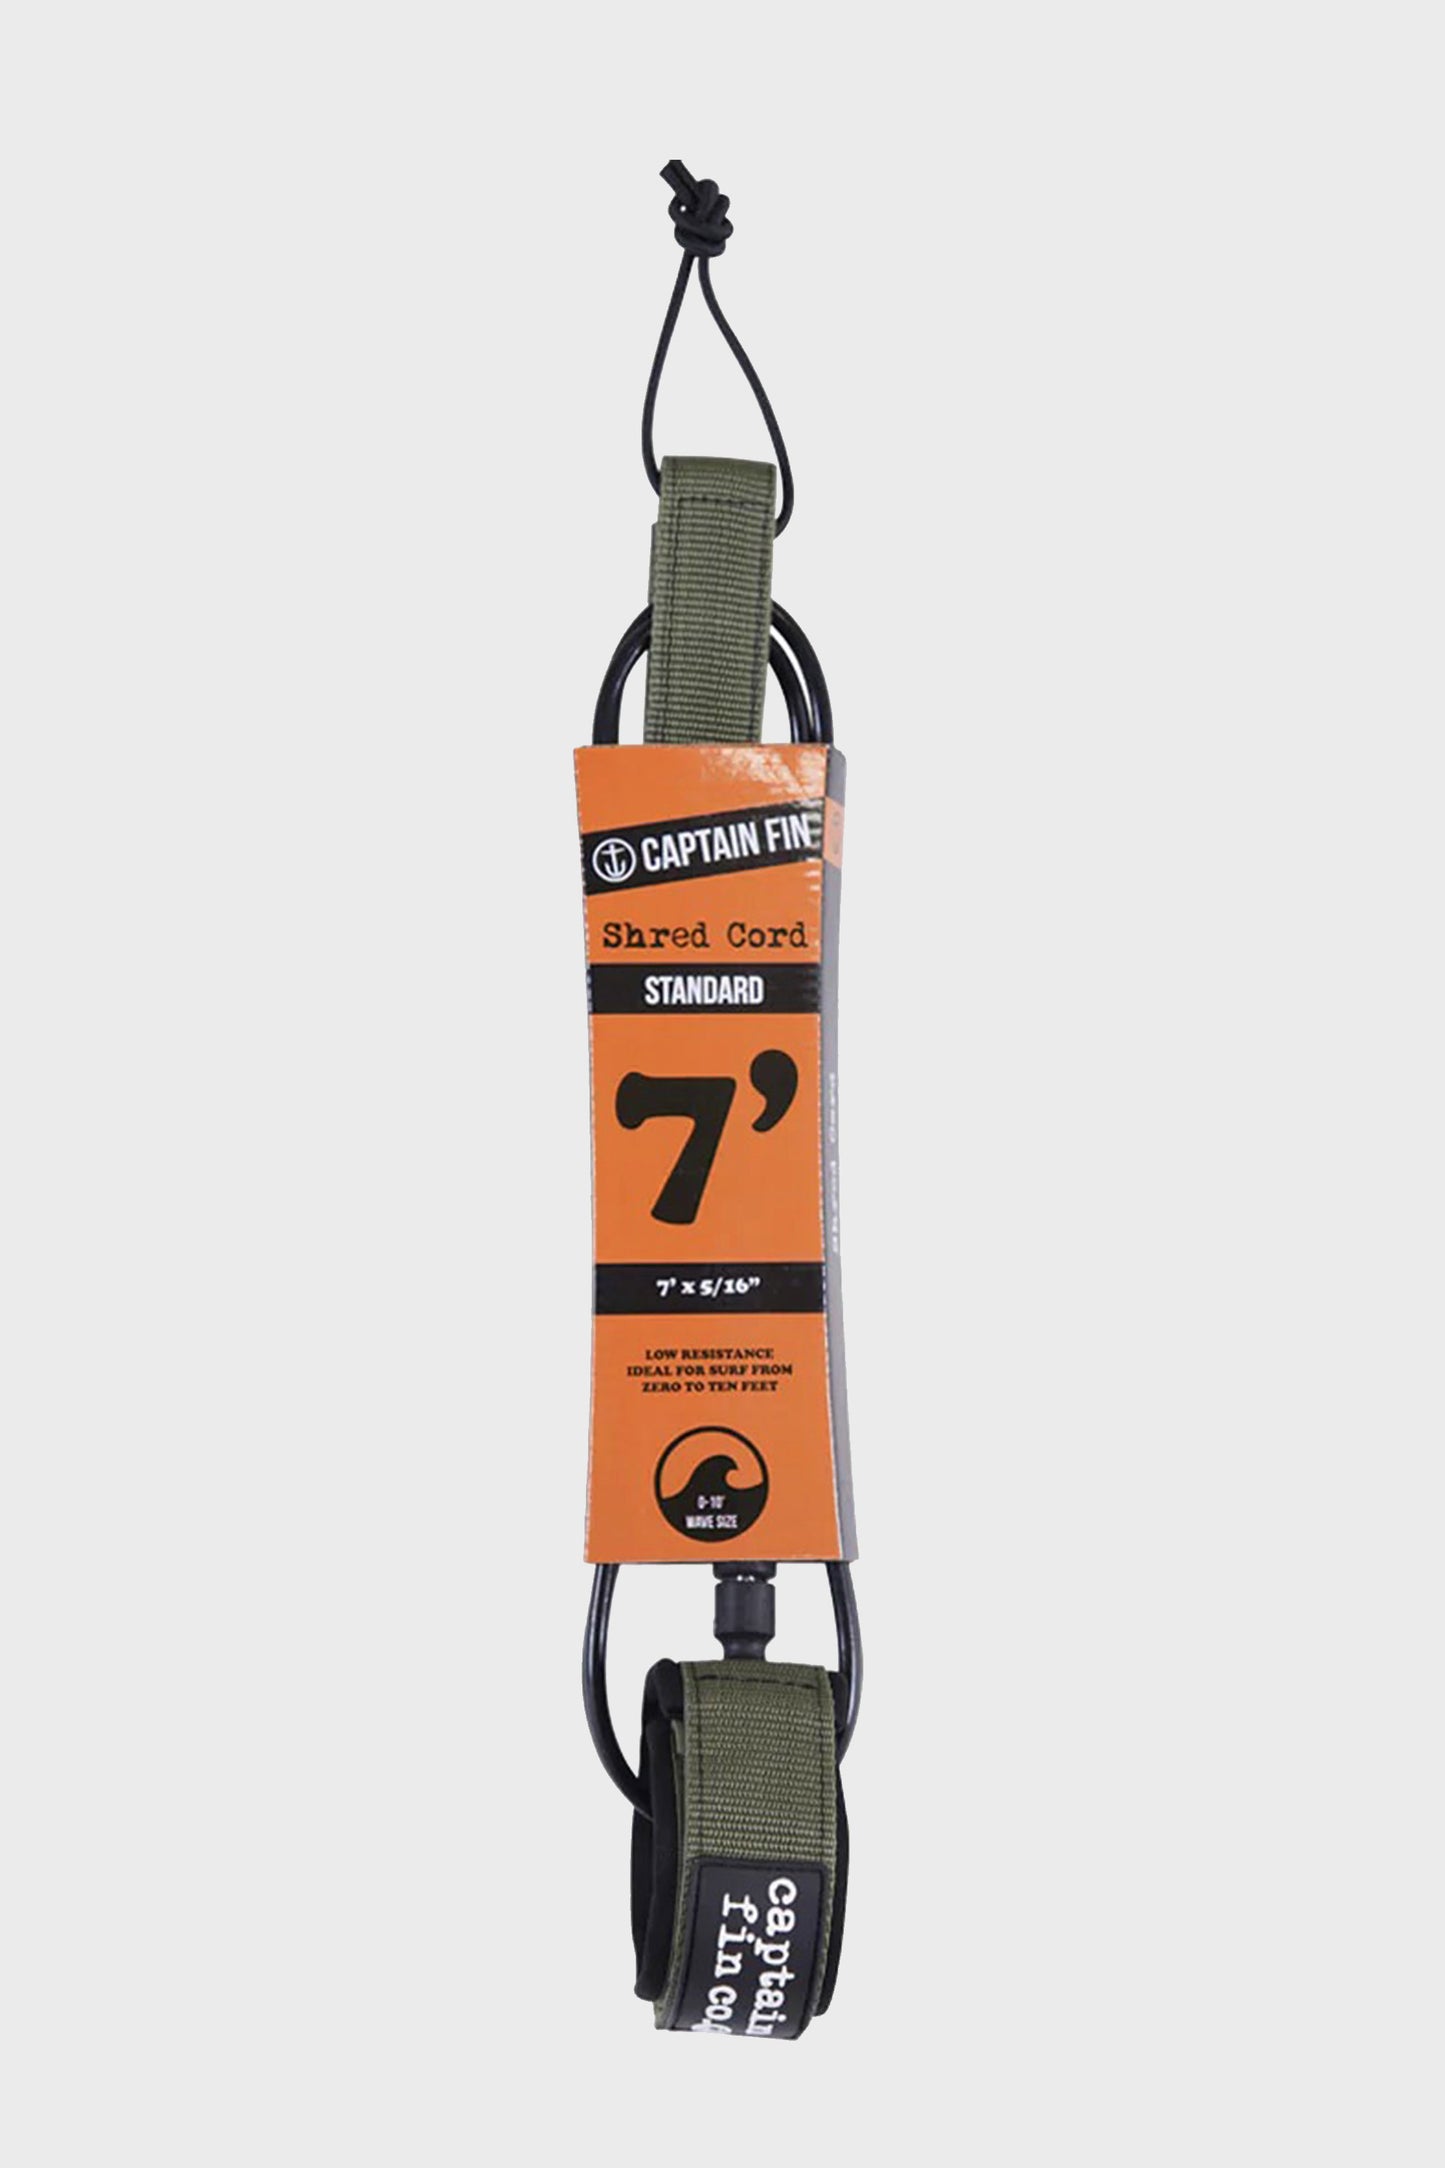 Pukas-Surf-Shop-Captain-Fin-leashes-Shred-Cord-7-army